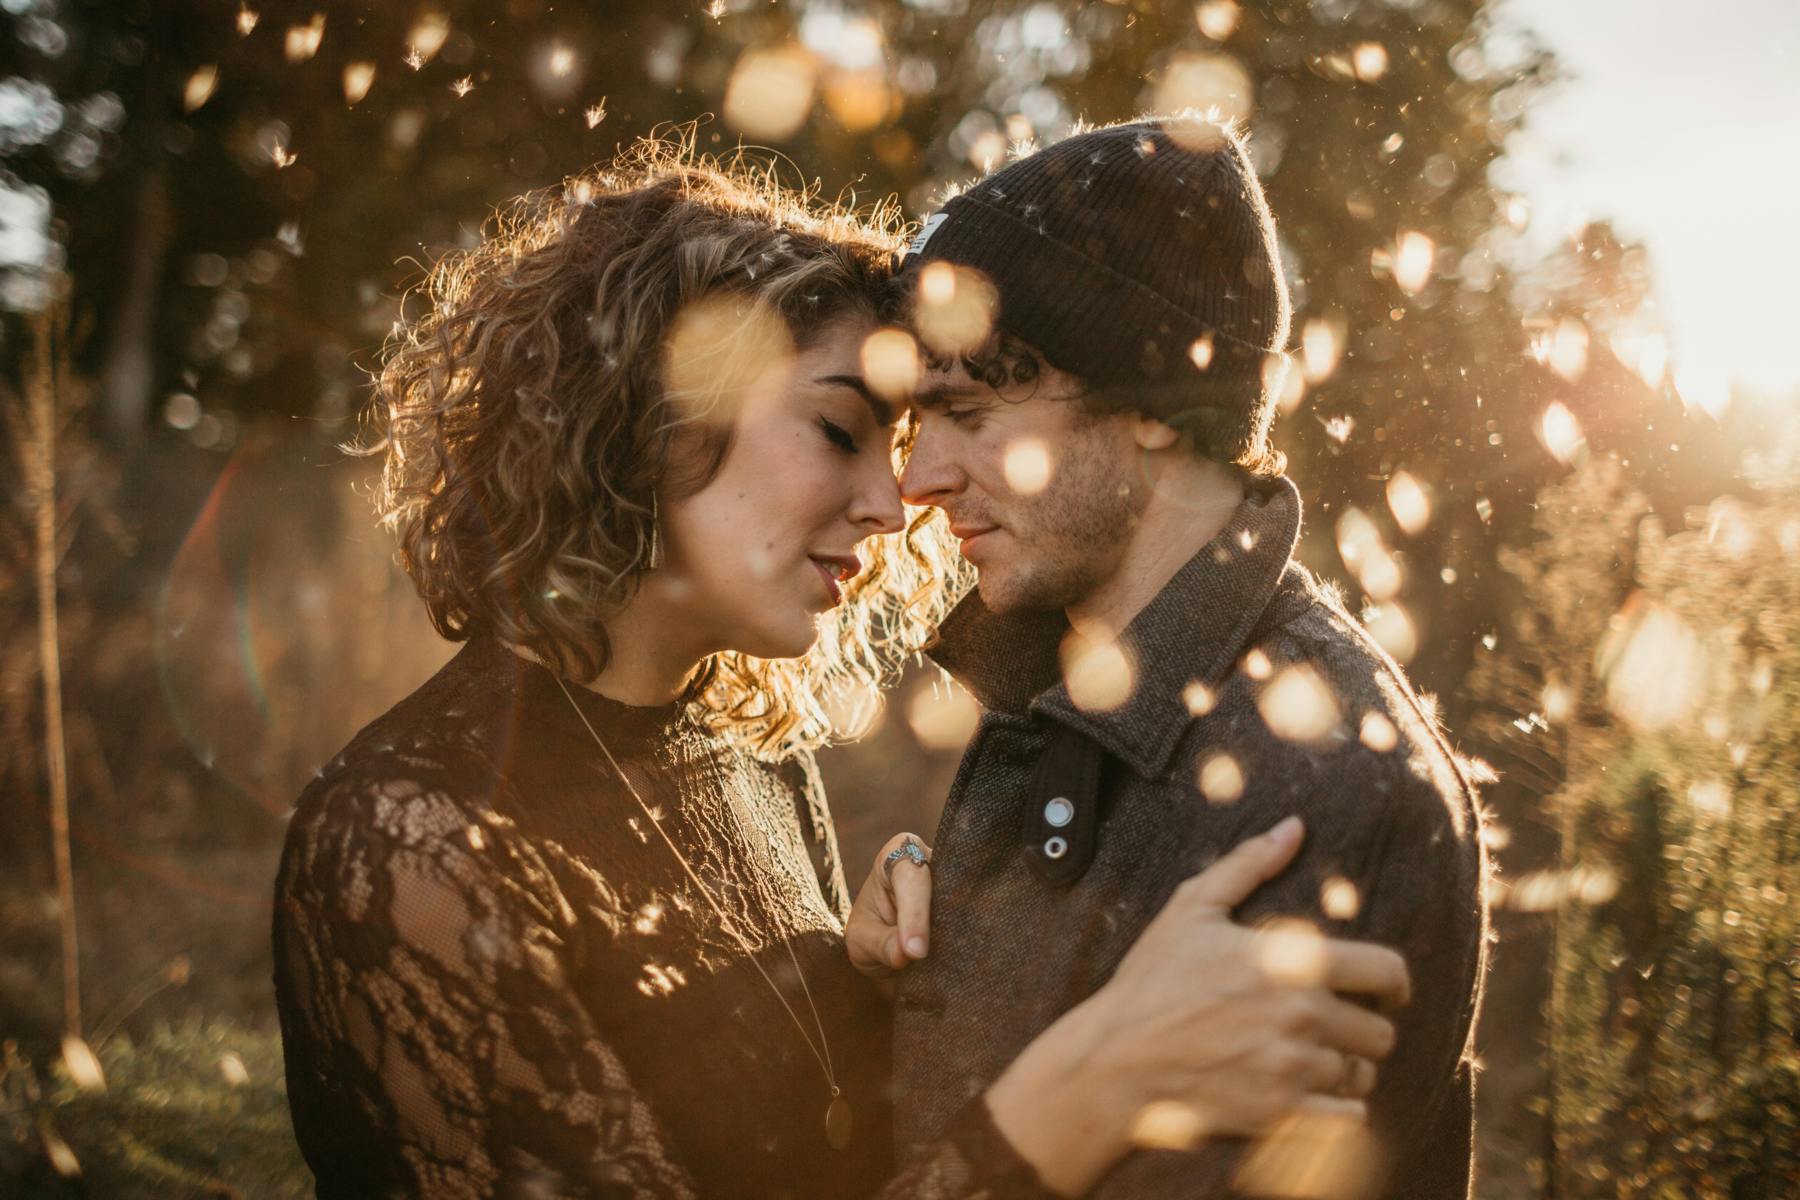 Husband and wife embrace in the autumn air